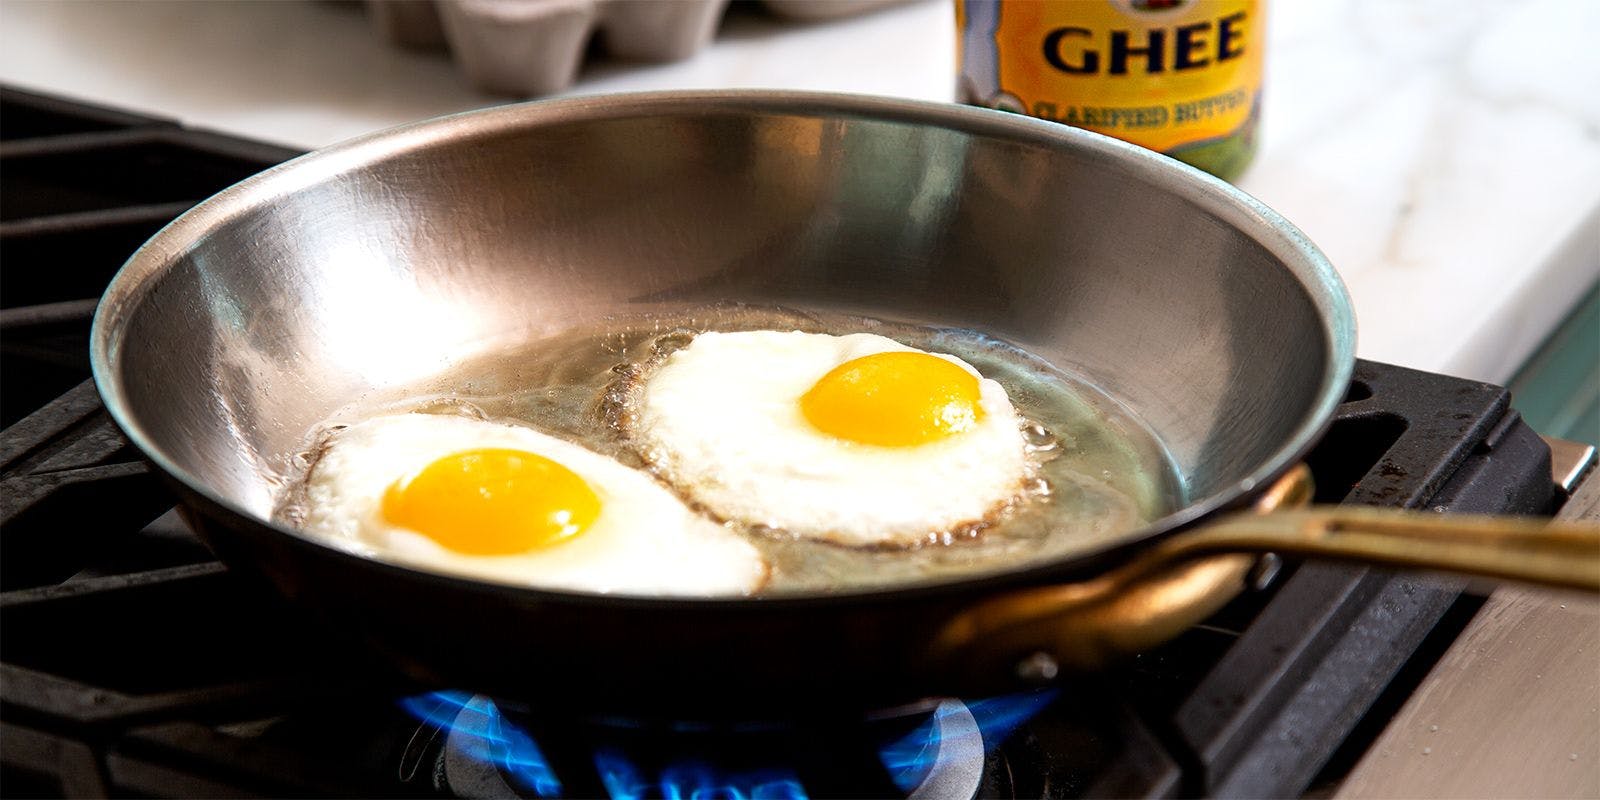 Two eggs fry in a pan over the stove with Organic Valley Ghee.